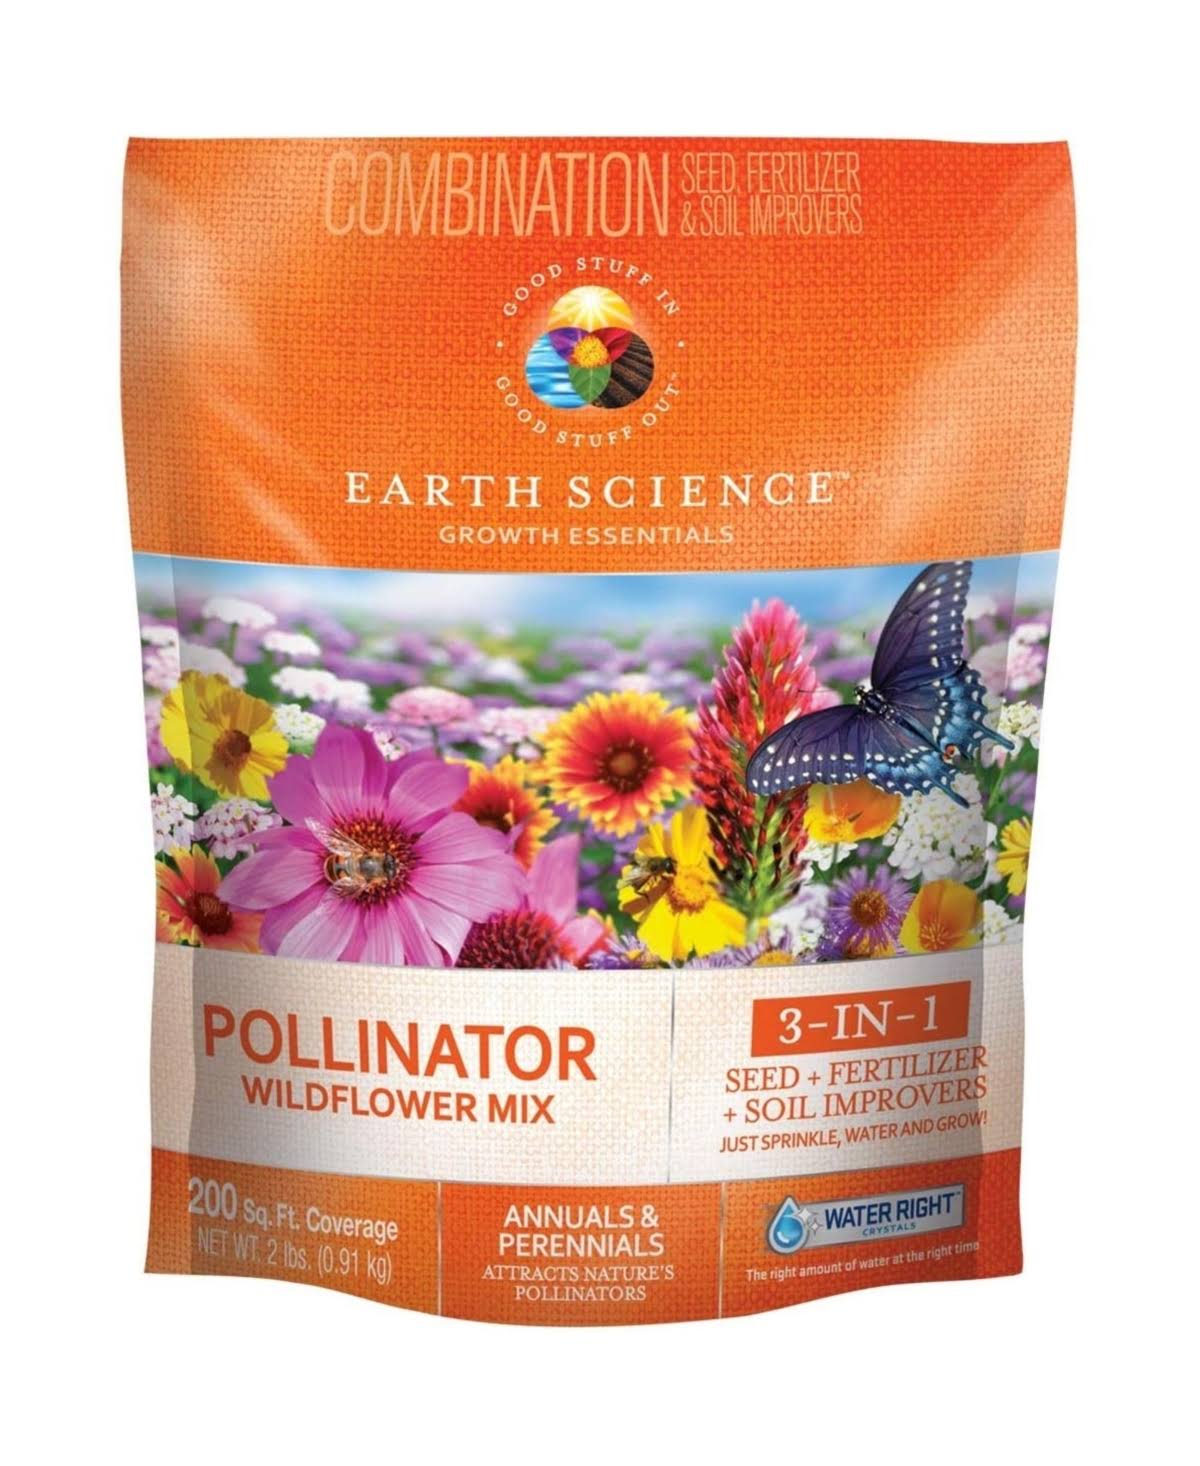 Earth Science Pollinator Wildflower Mix Covers 200 Sq. Ft. 2-Lbs. 12136-6